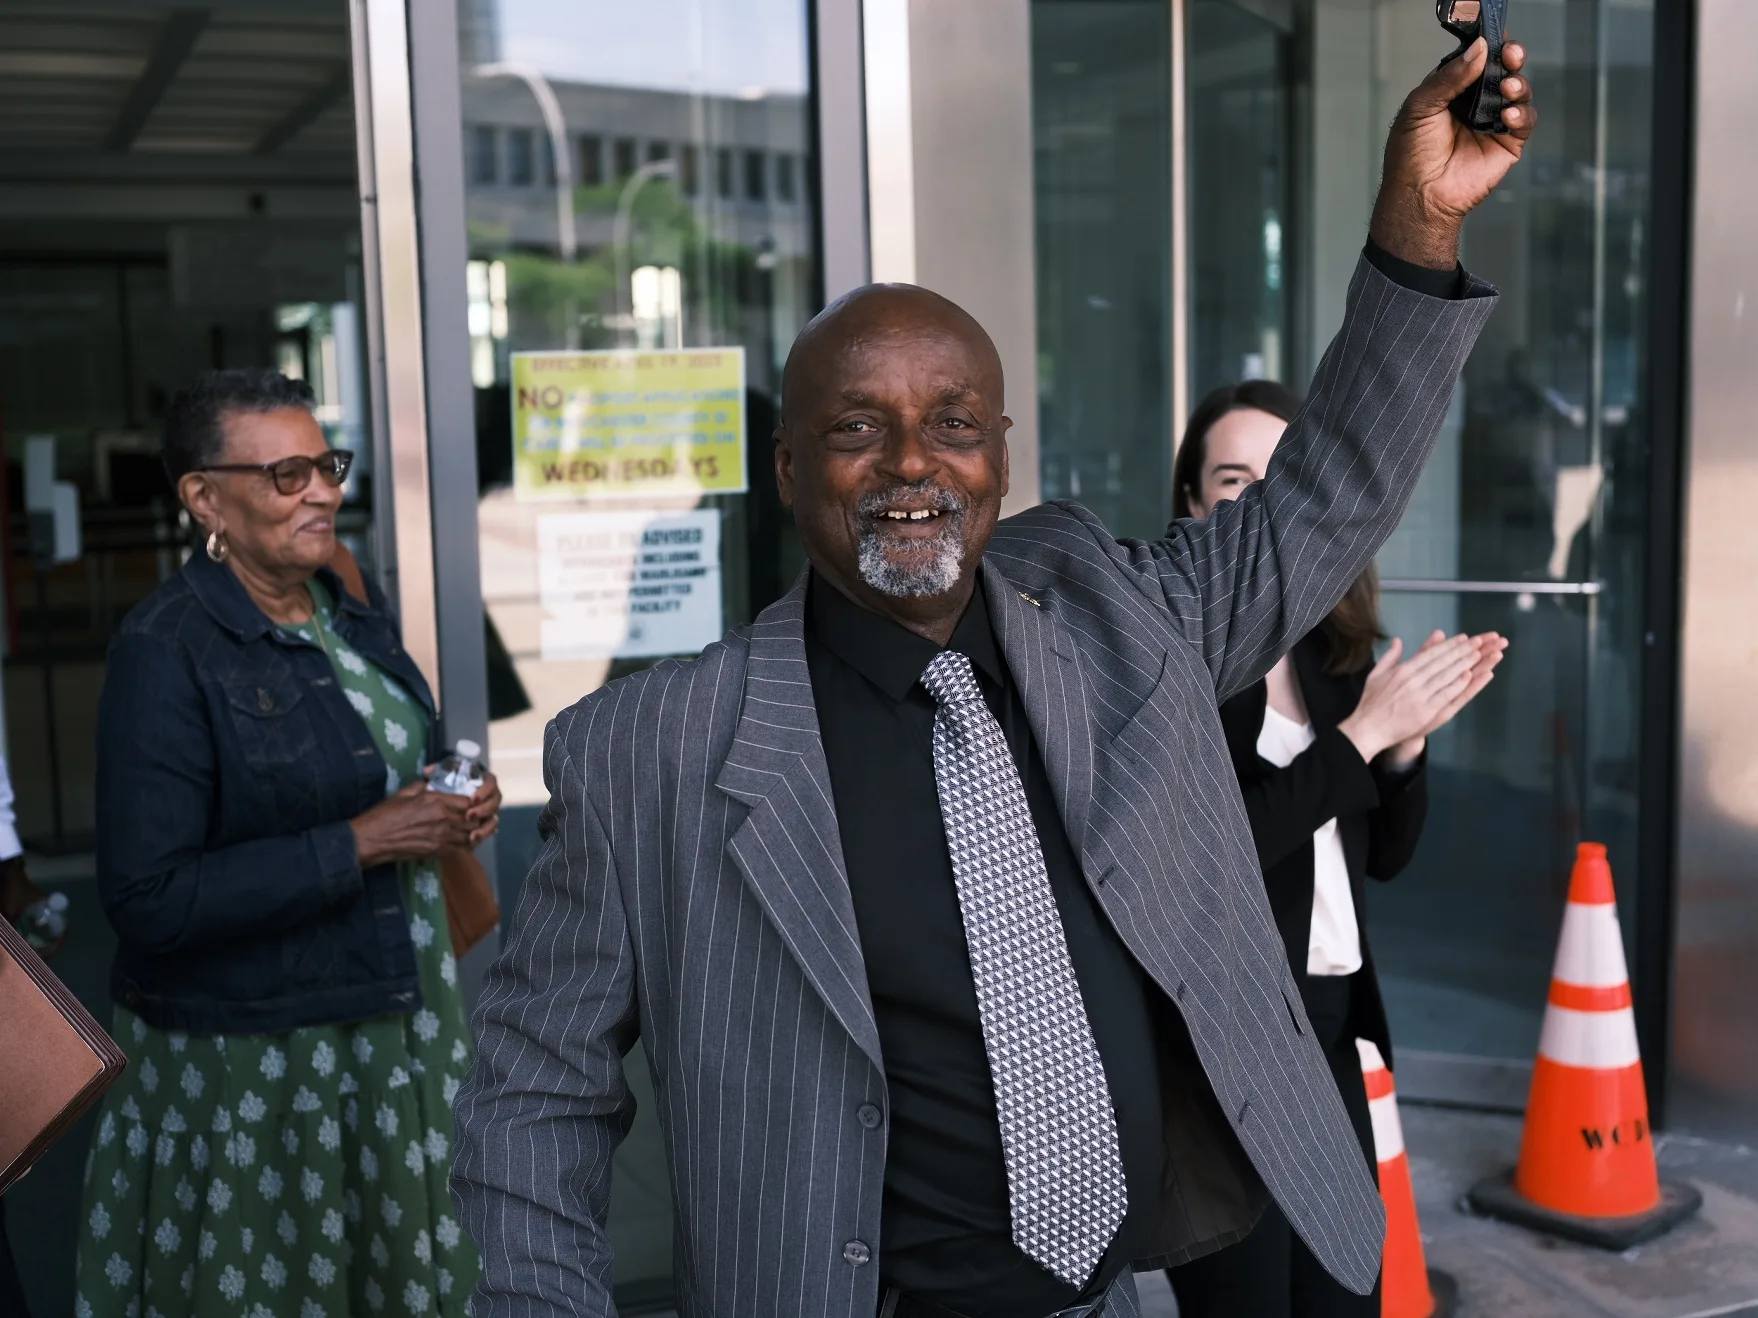 Innocence Project client Leonard Mack exonerated after 47 years in White Plains, New York on Sept. 5, 2023 (Image: Elijah Craig II/Innocence Project)
